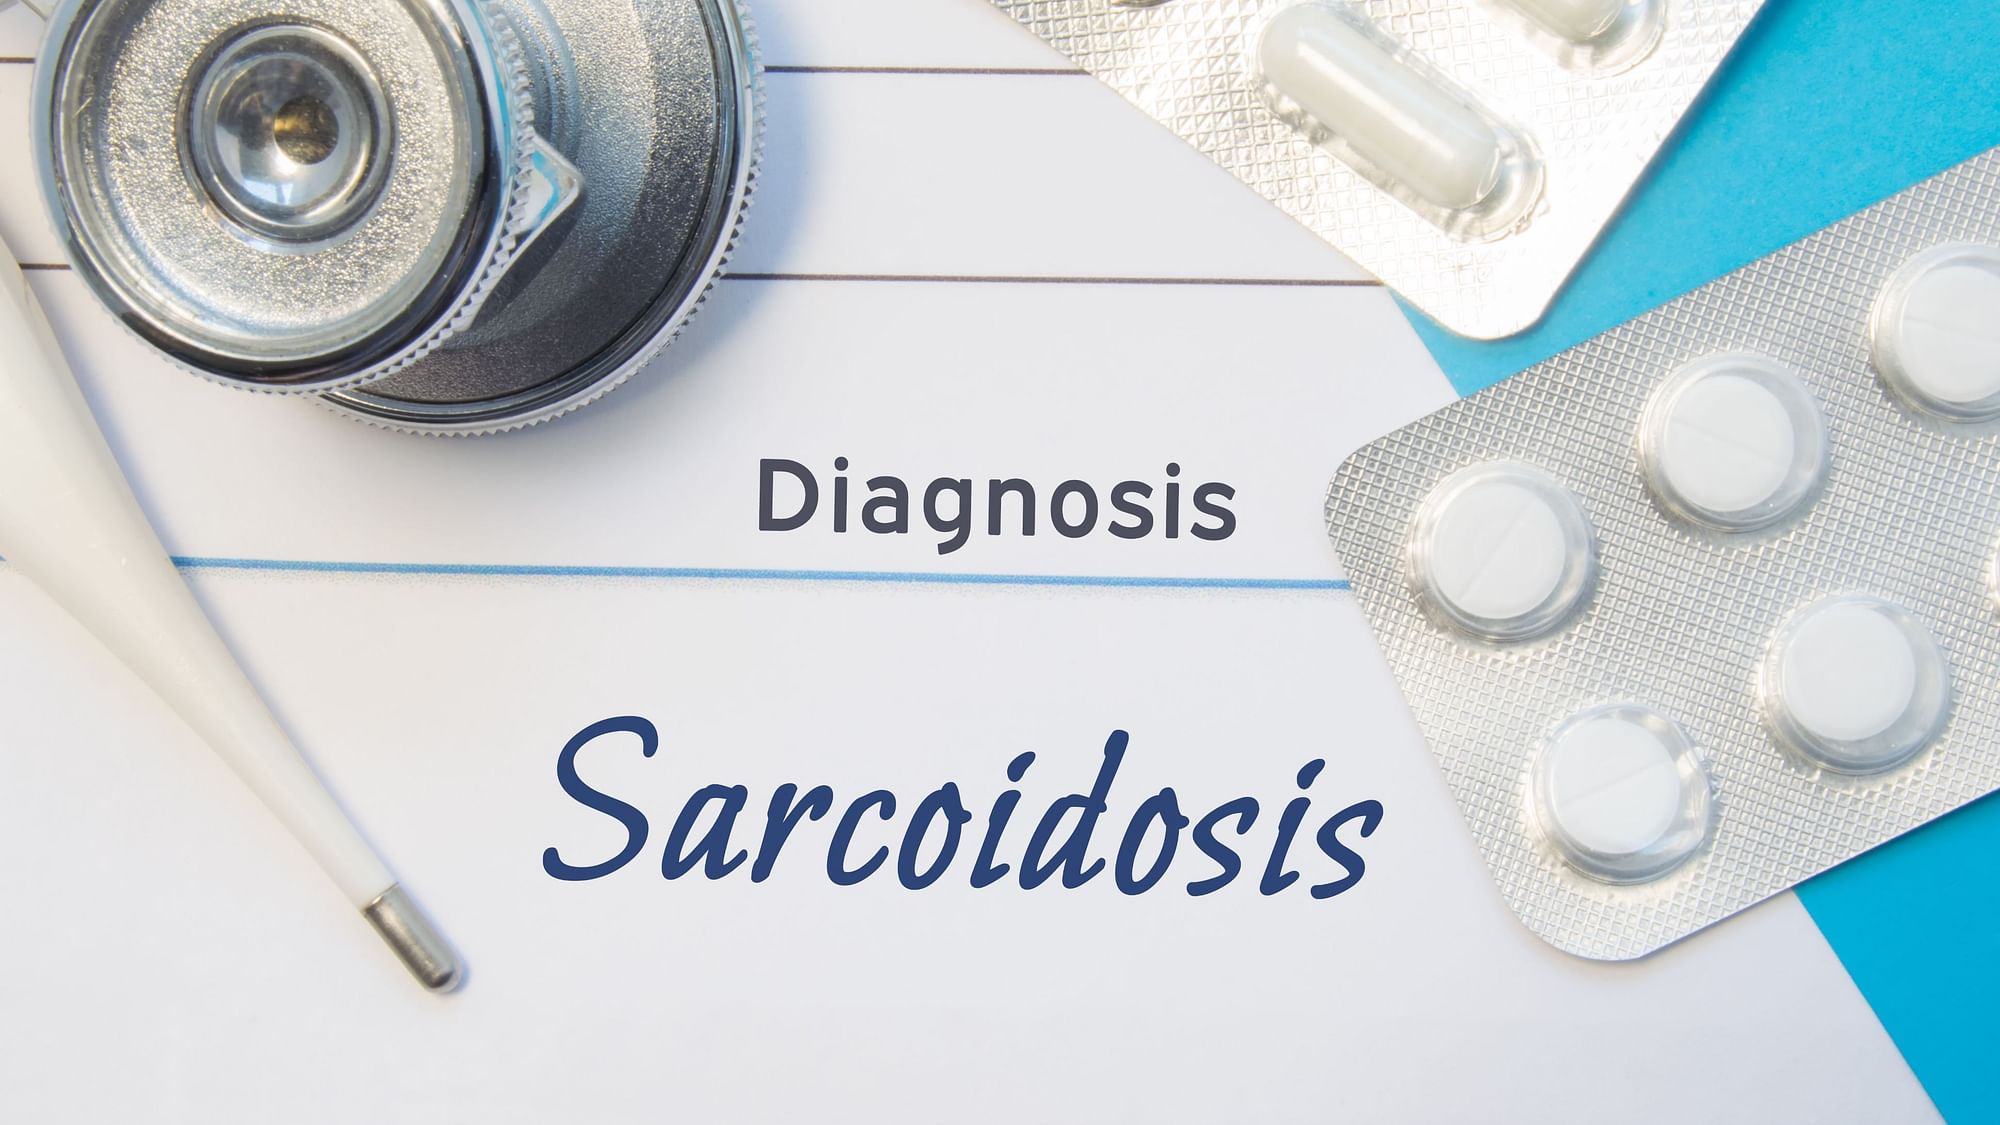 Sarcoidosis is an inflammatory disease that affects multiple organs in the body.